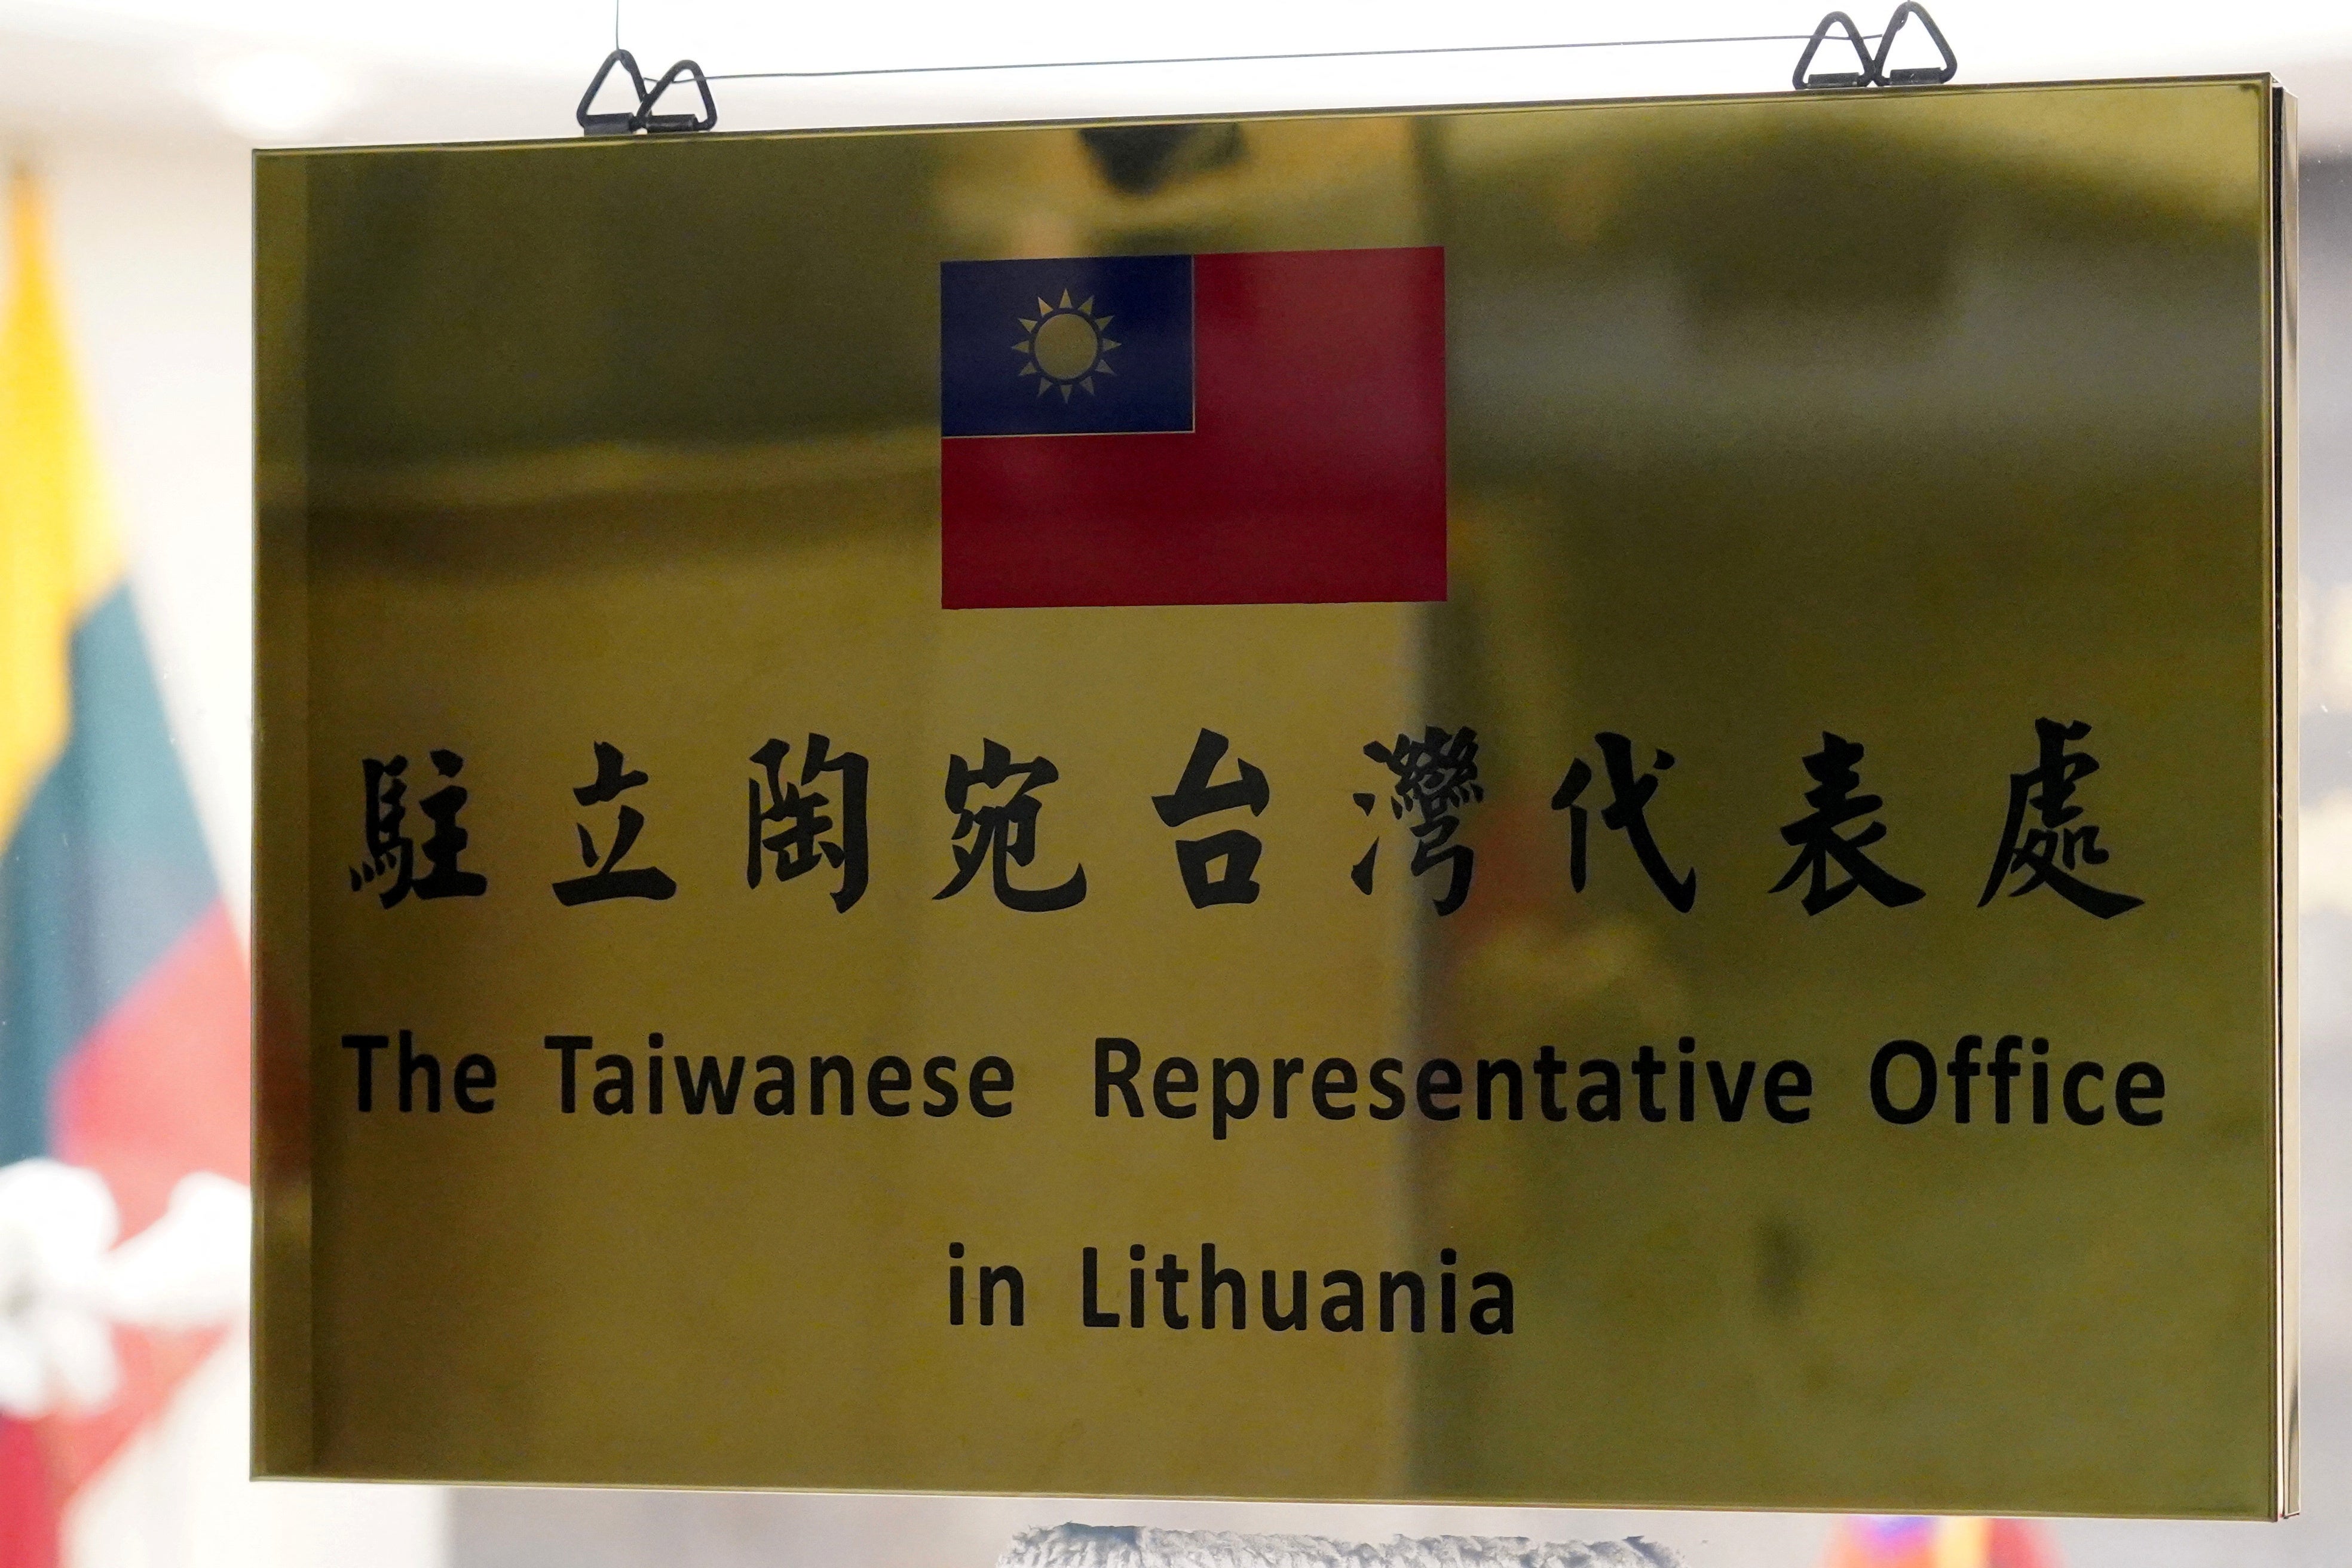 A plaque reads “The Taiwanese Representative Office in Lithuania” in Vilnius, 20 January 2022